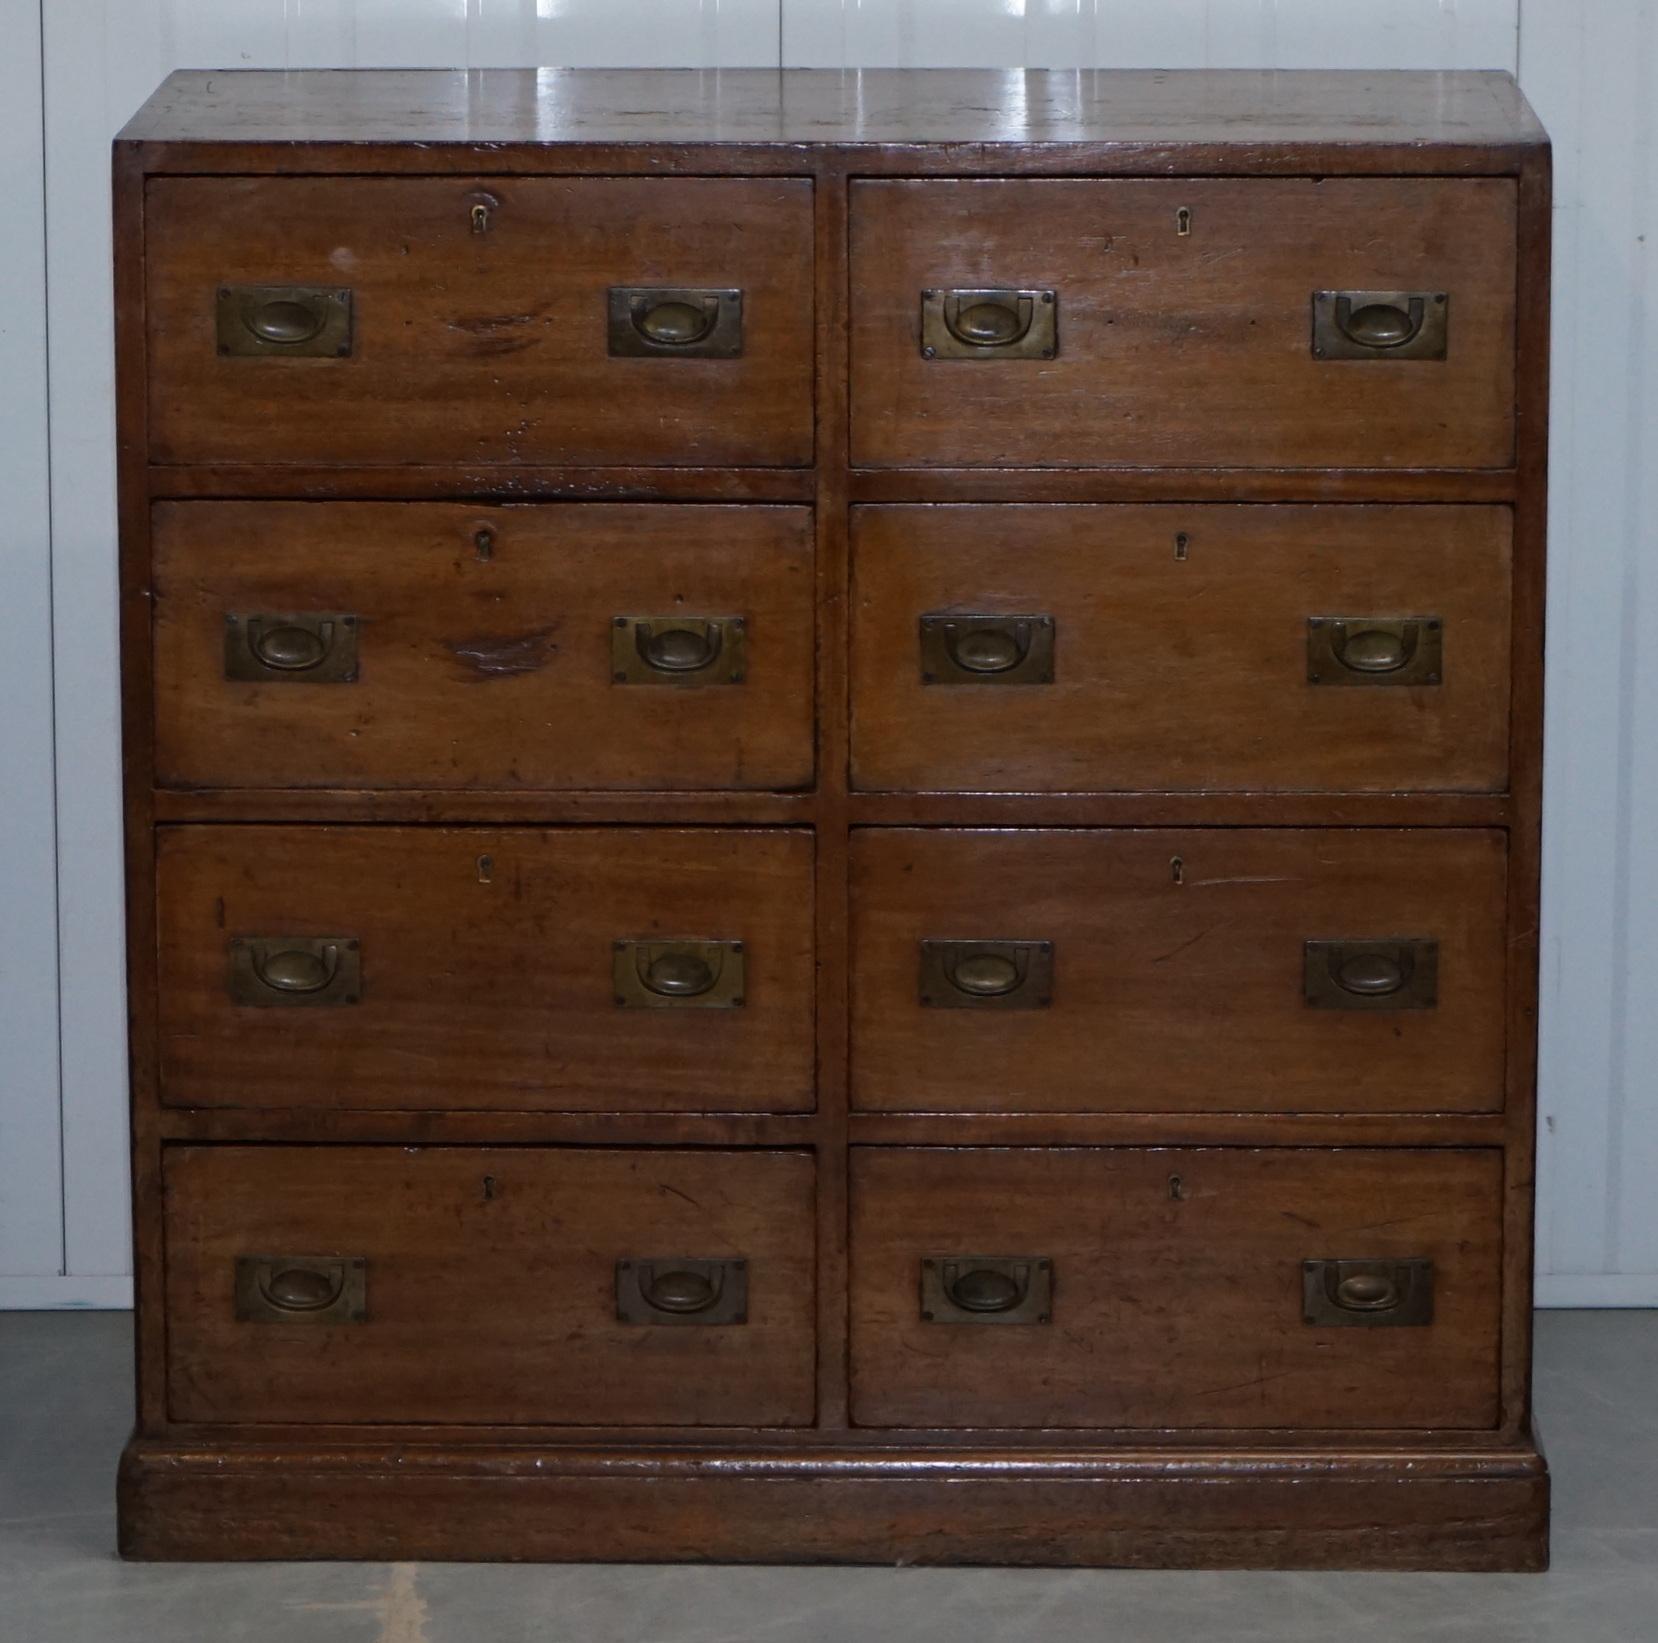 We are delighted to offer for sale this lovely very rare Military officers Campaign sideboard, chest, bank of drawers made by Hobbs & Co London

A genuine and well used old set of Campaign drawers in the sideboard style, this type of drawer never